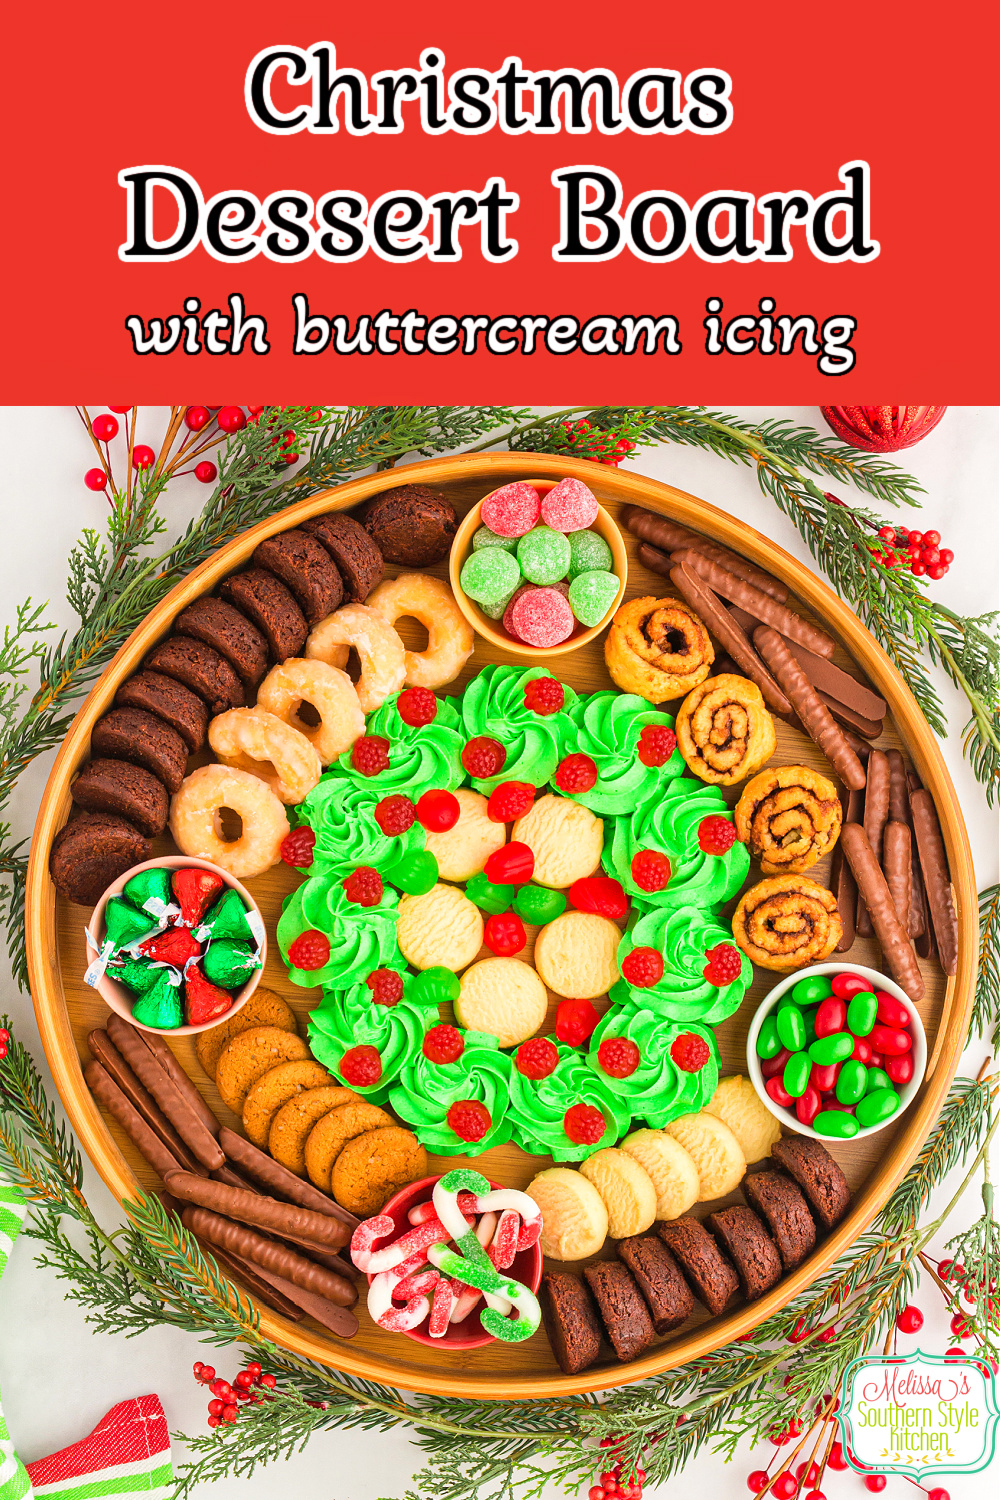 This stunning Christmas Dessert Board features a green tinted homemade buttercream frosting for dipping your favorite cookies and treats. #butterboard #buttercreamfrosting #vanillafrosting #charcuterie #desserts #dessertboard #christmasdesserts #candy #cookies #chocolate via @melissasssk